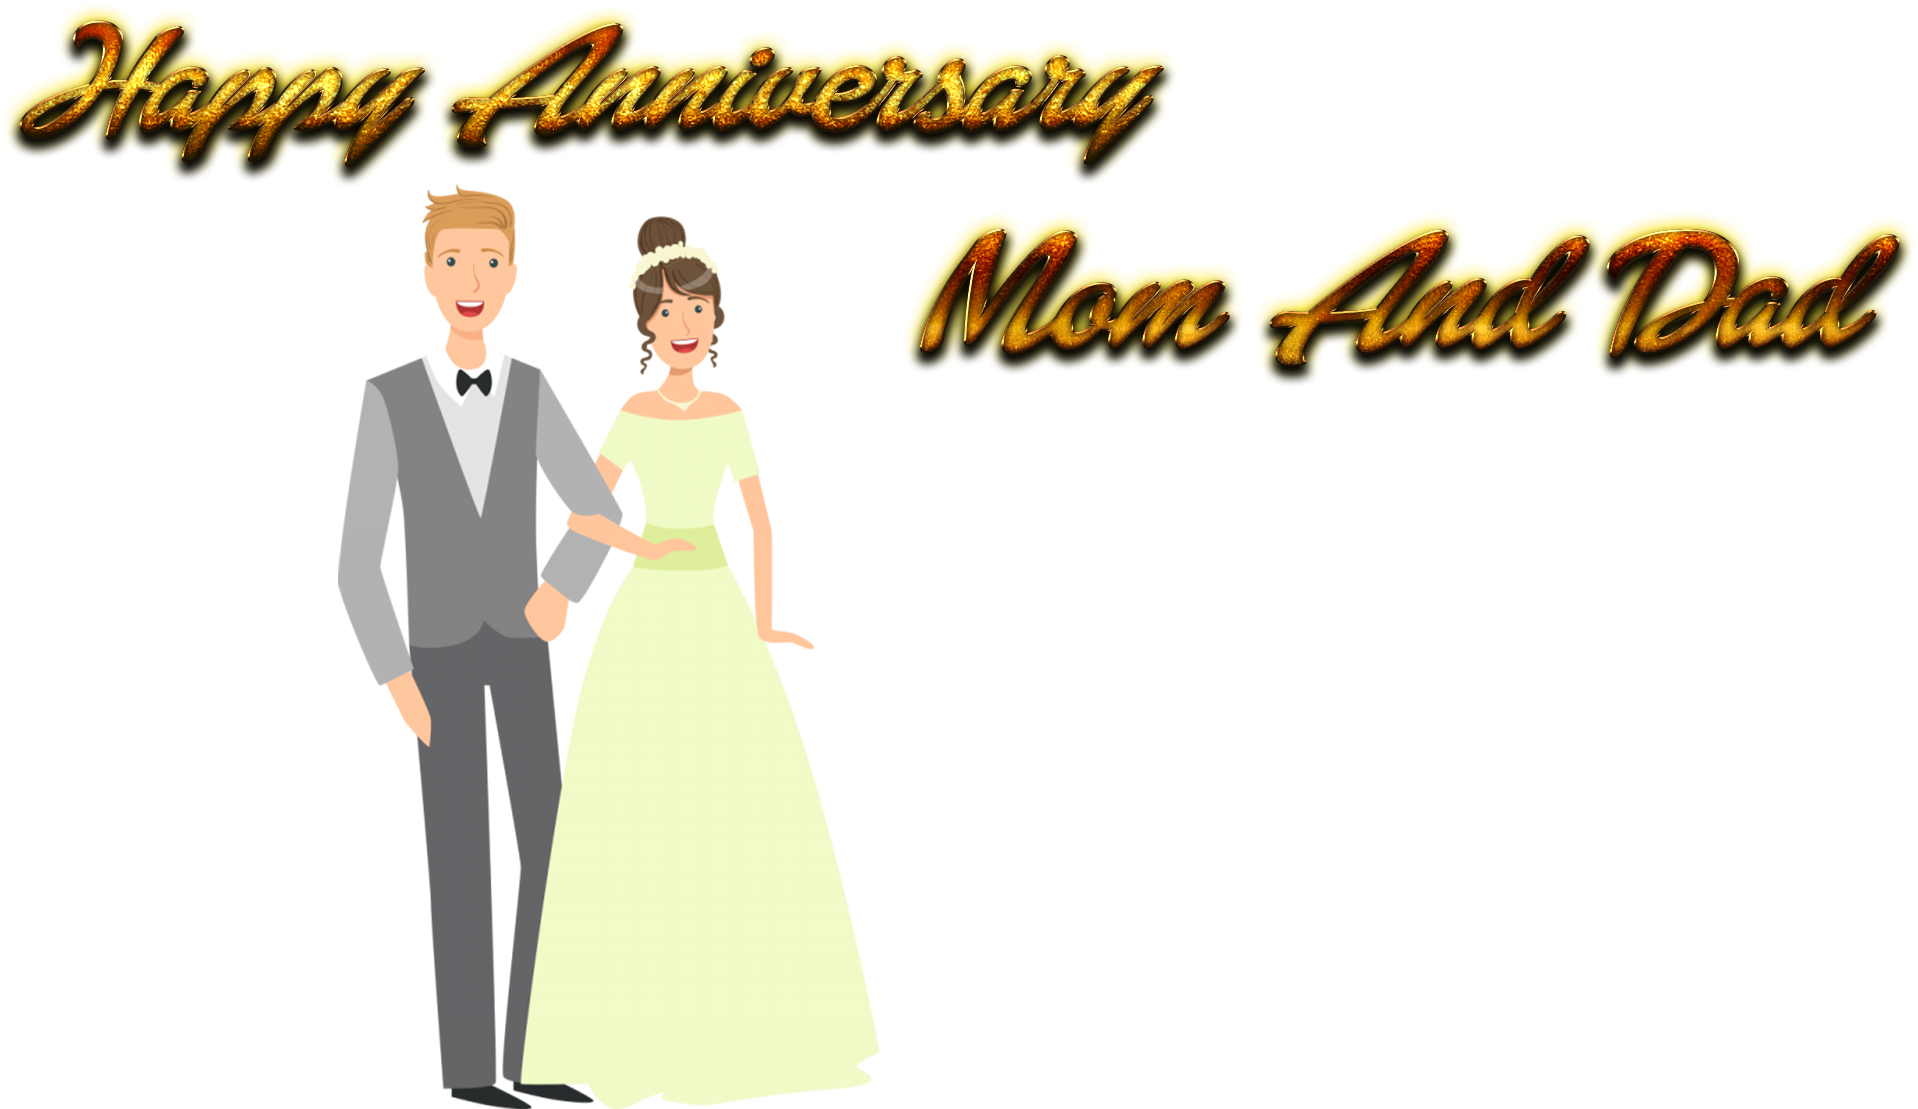 Download Happy Anniversary Mom And Dad Cartoon | Wallpapers.com